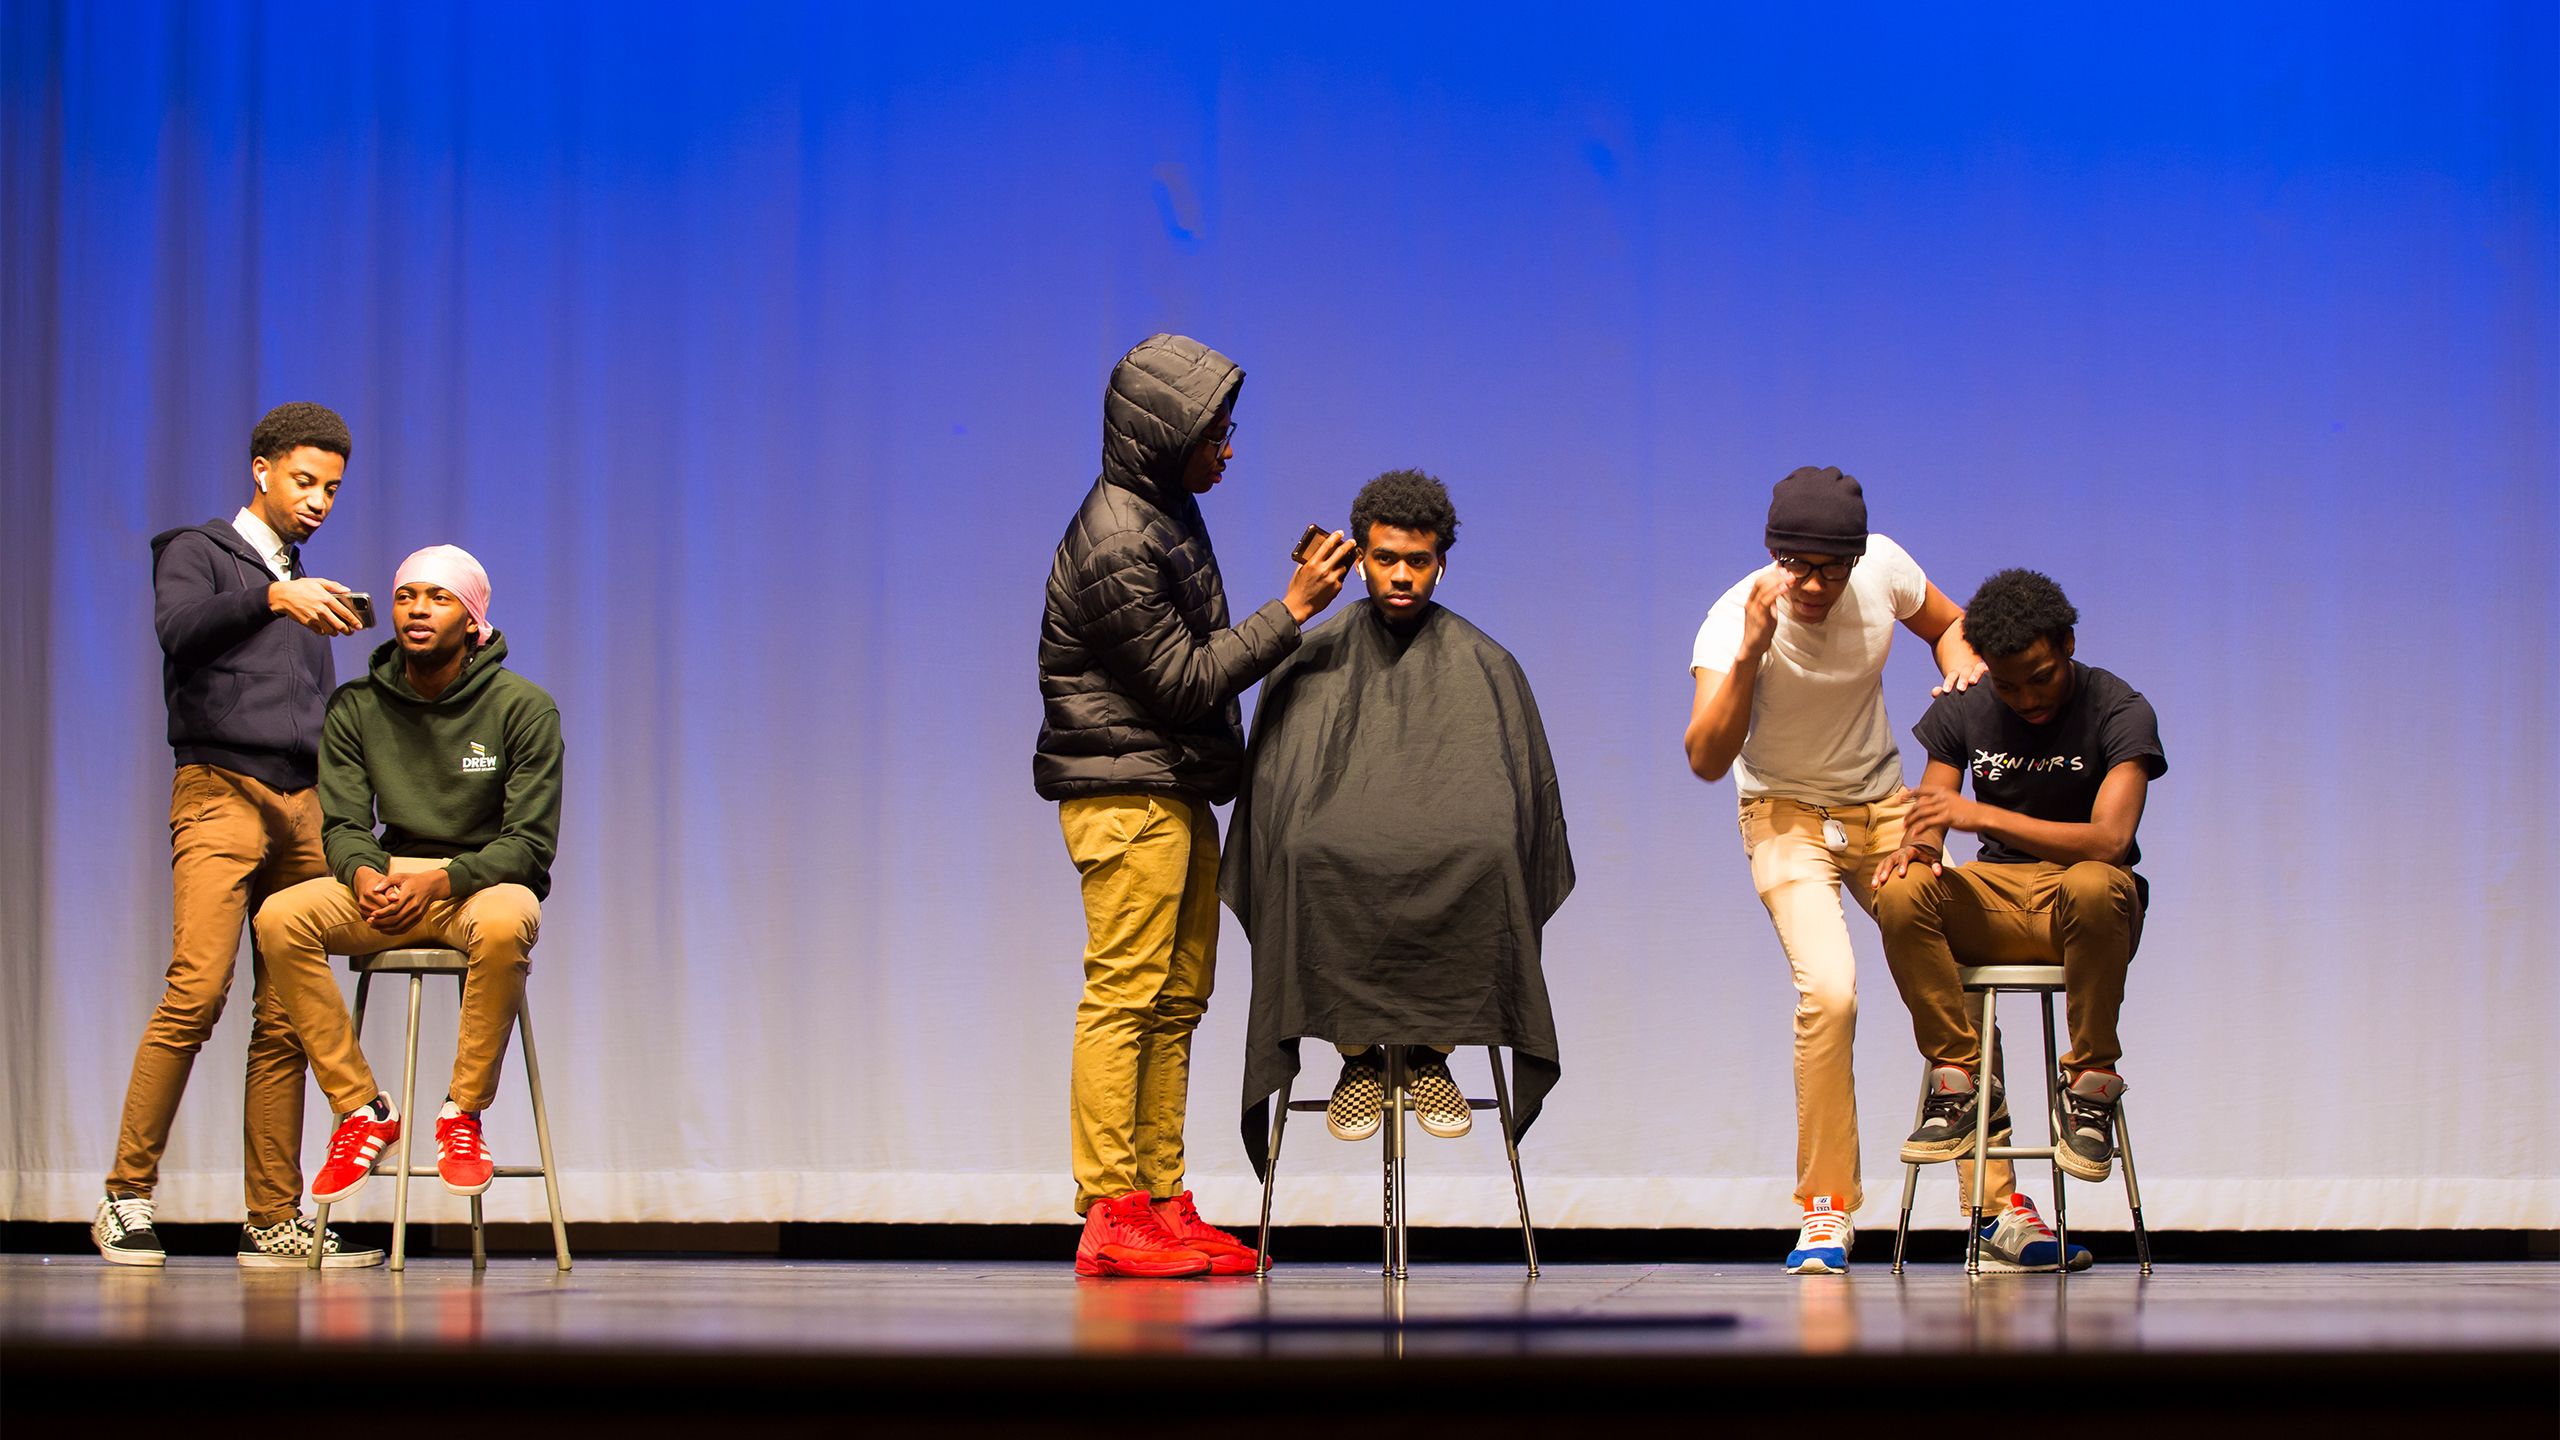 Male students act out a conversation in a barber shop